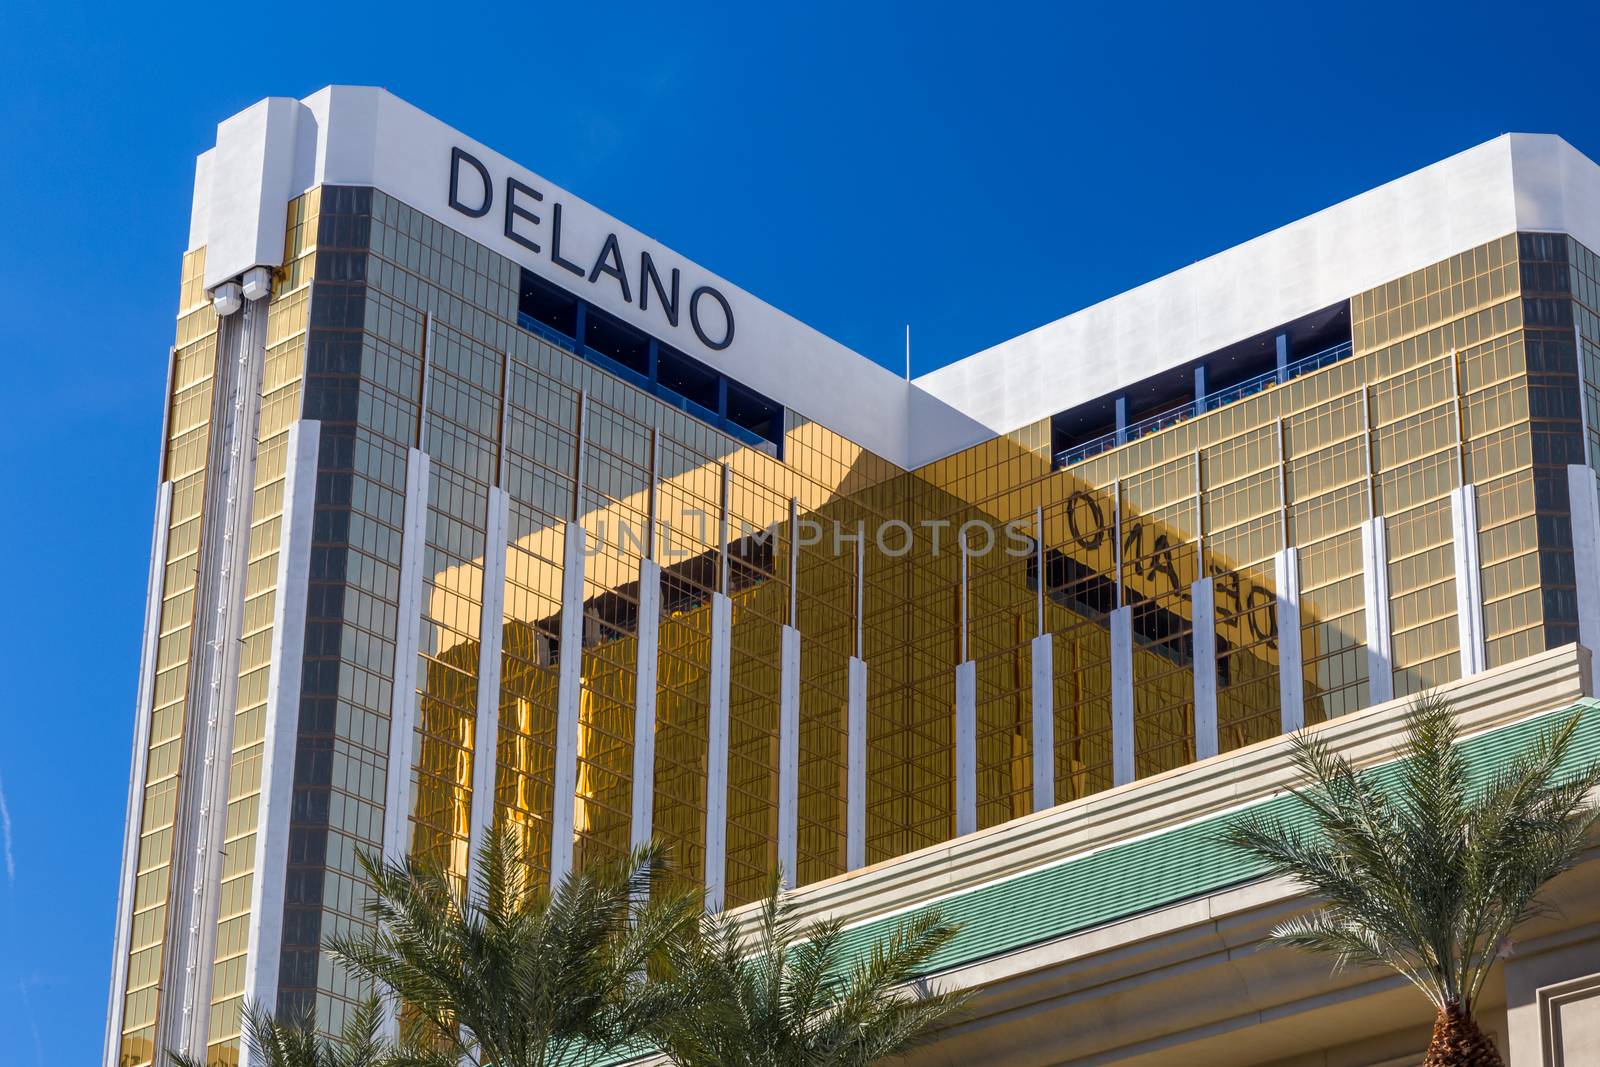 LAS VEGAS, NV/USA - FEBRUARY 15, 2016: Delano Las Vegas Hotel and Casino. The Delano Las Vegas is on the Las Vegas Strip and is owned and operated by MGM Resorts International.